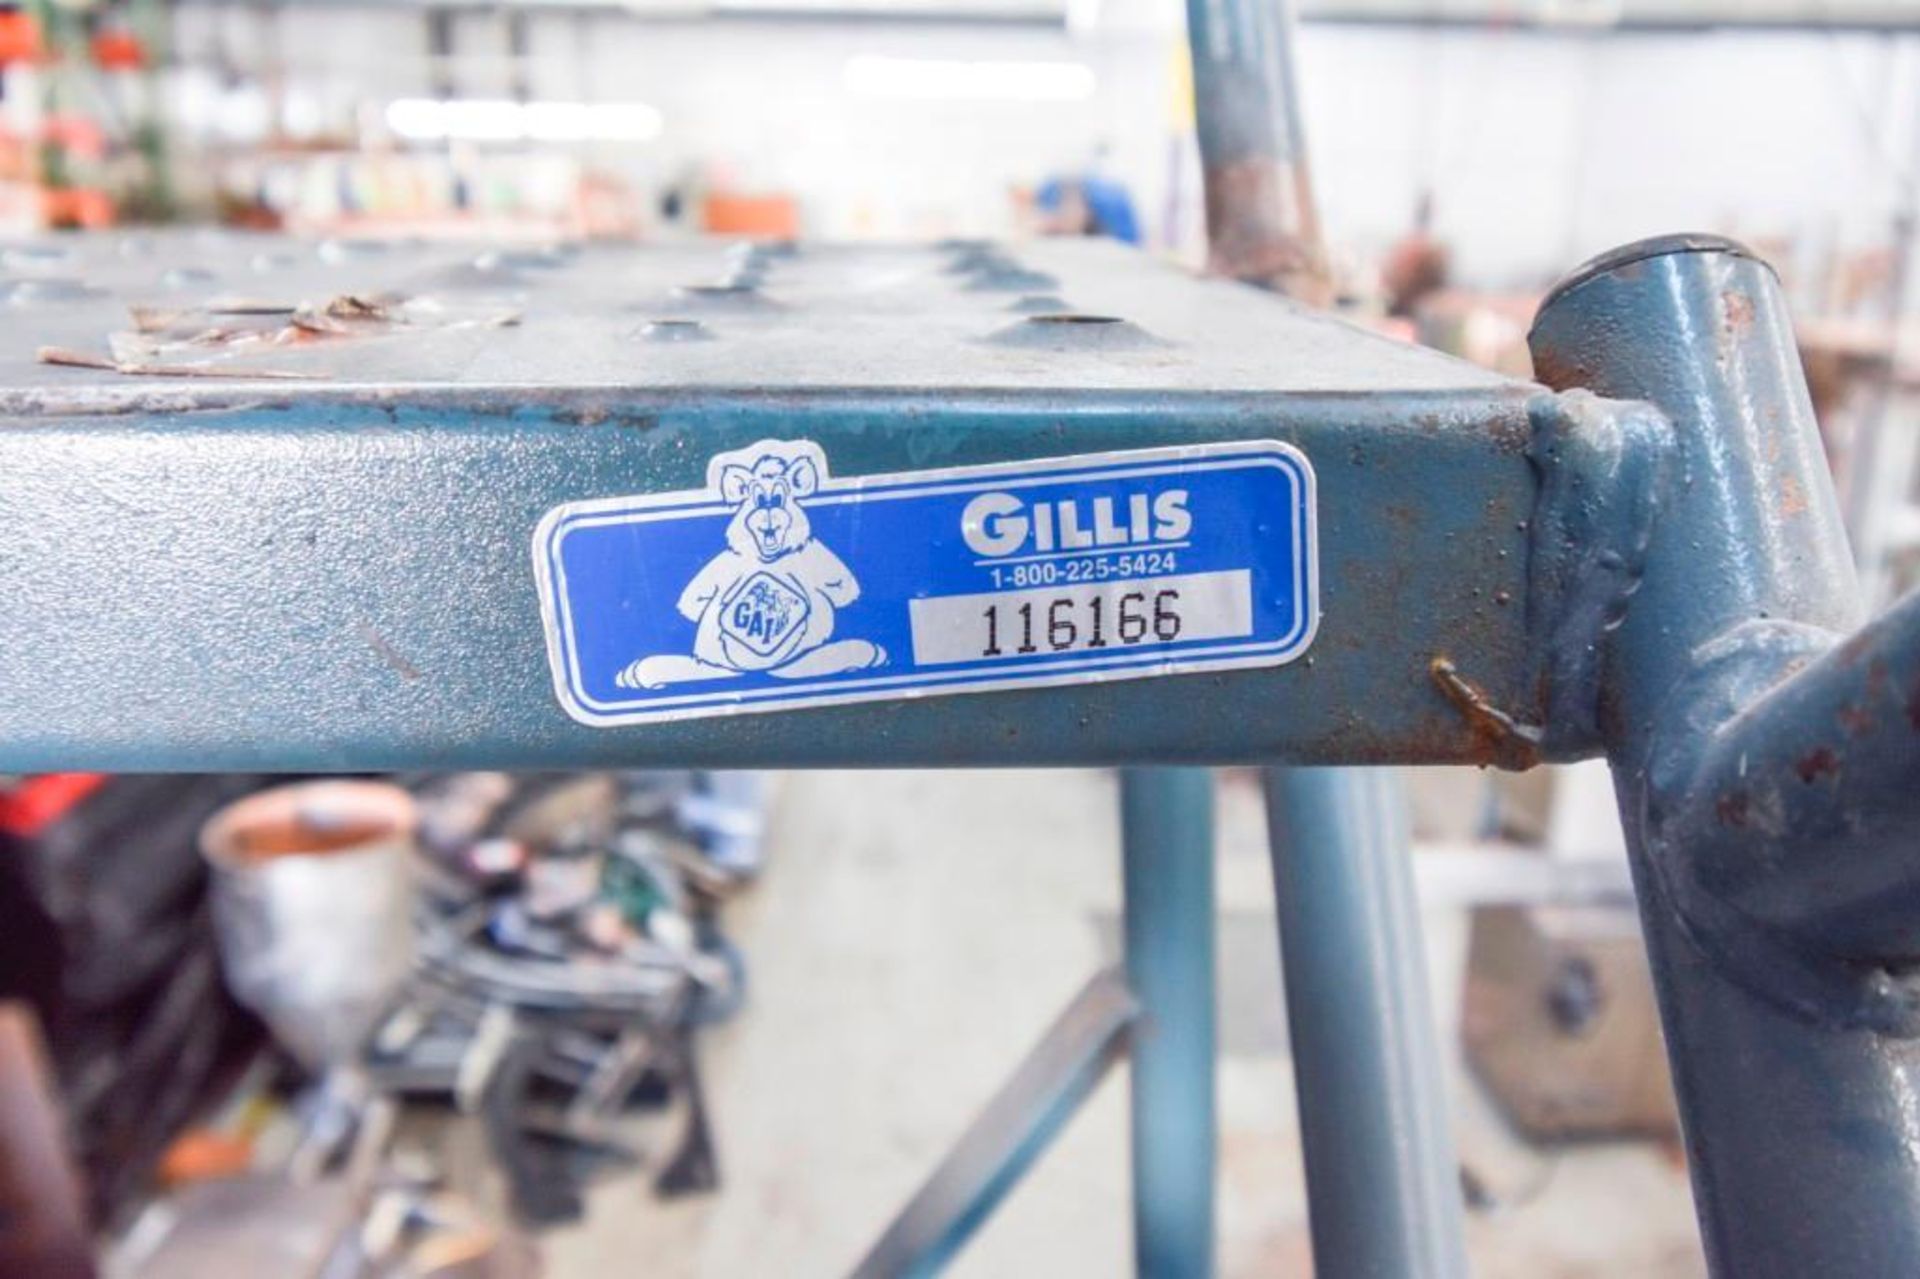 Gillis Rolling Warehouse Stairs - Image 14 of 16